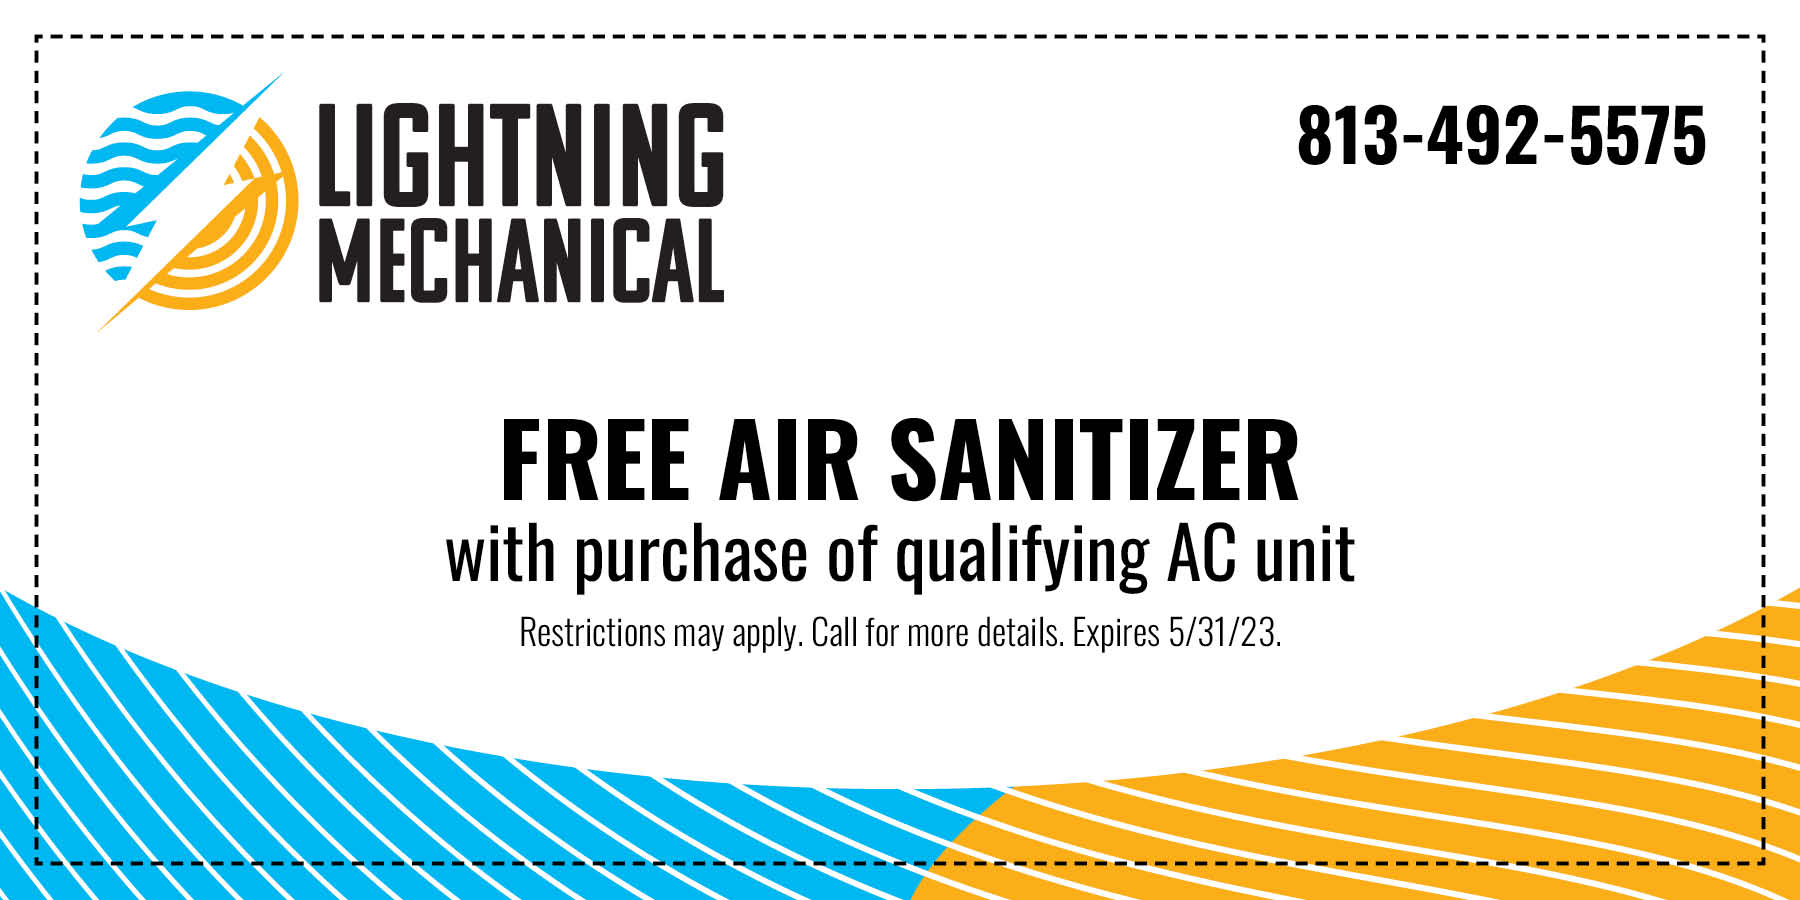 Free air sanitizer with purchase of qualifying AC unit expires 5/31/2023.